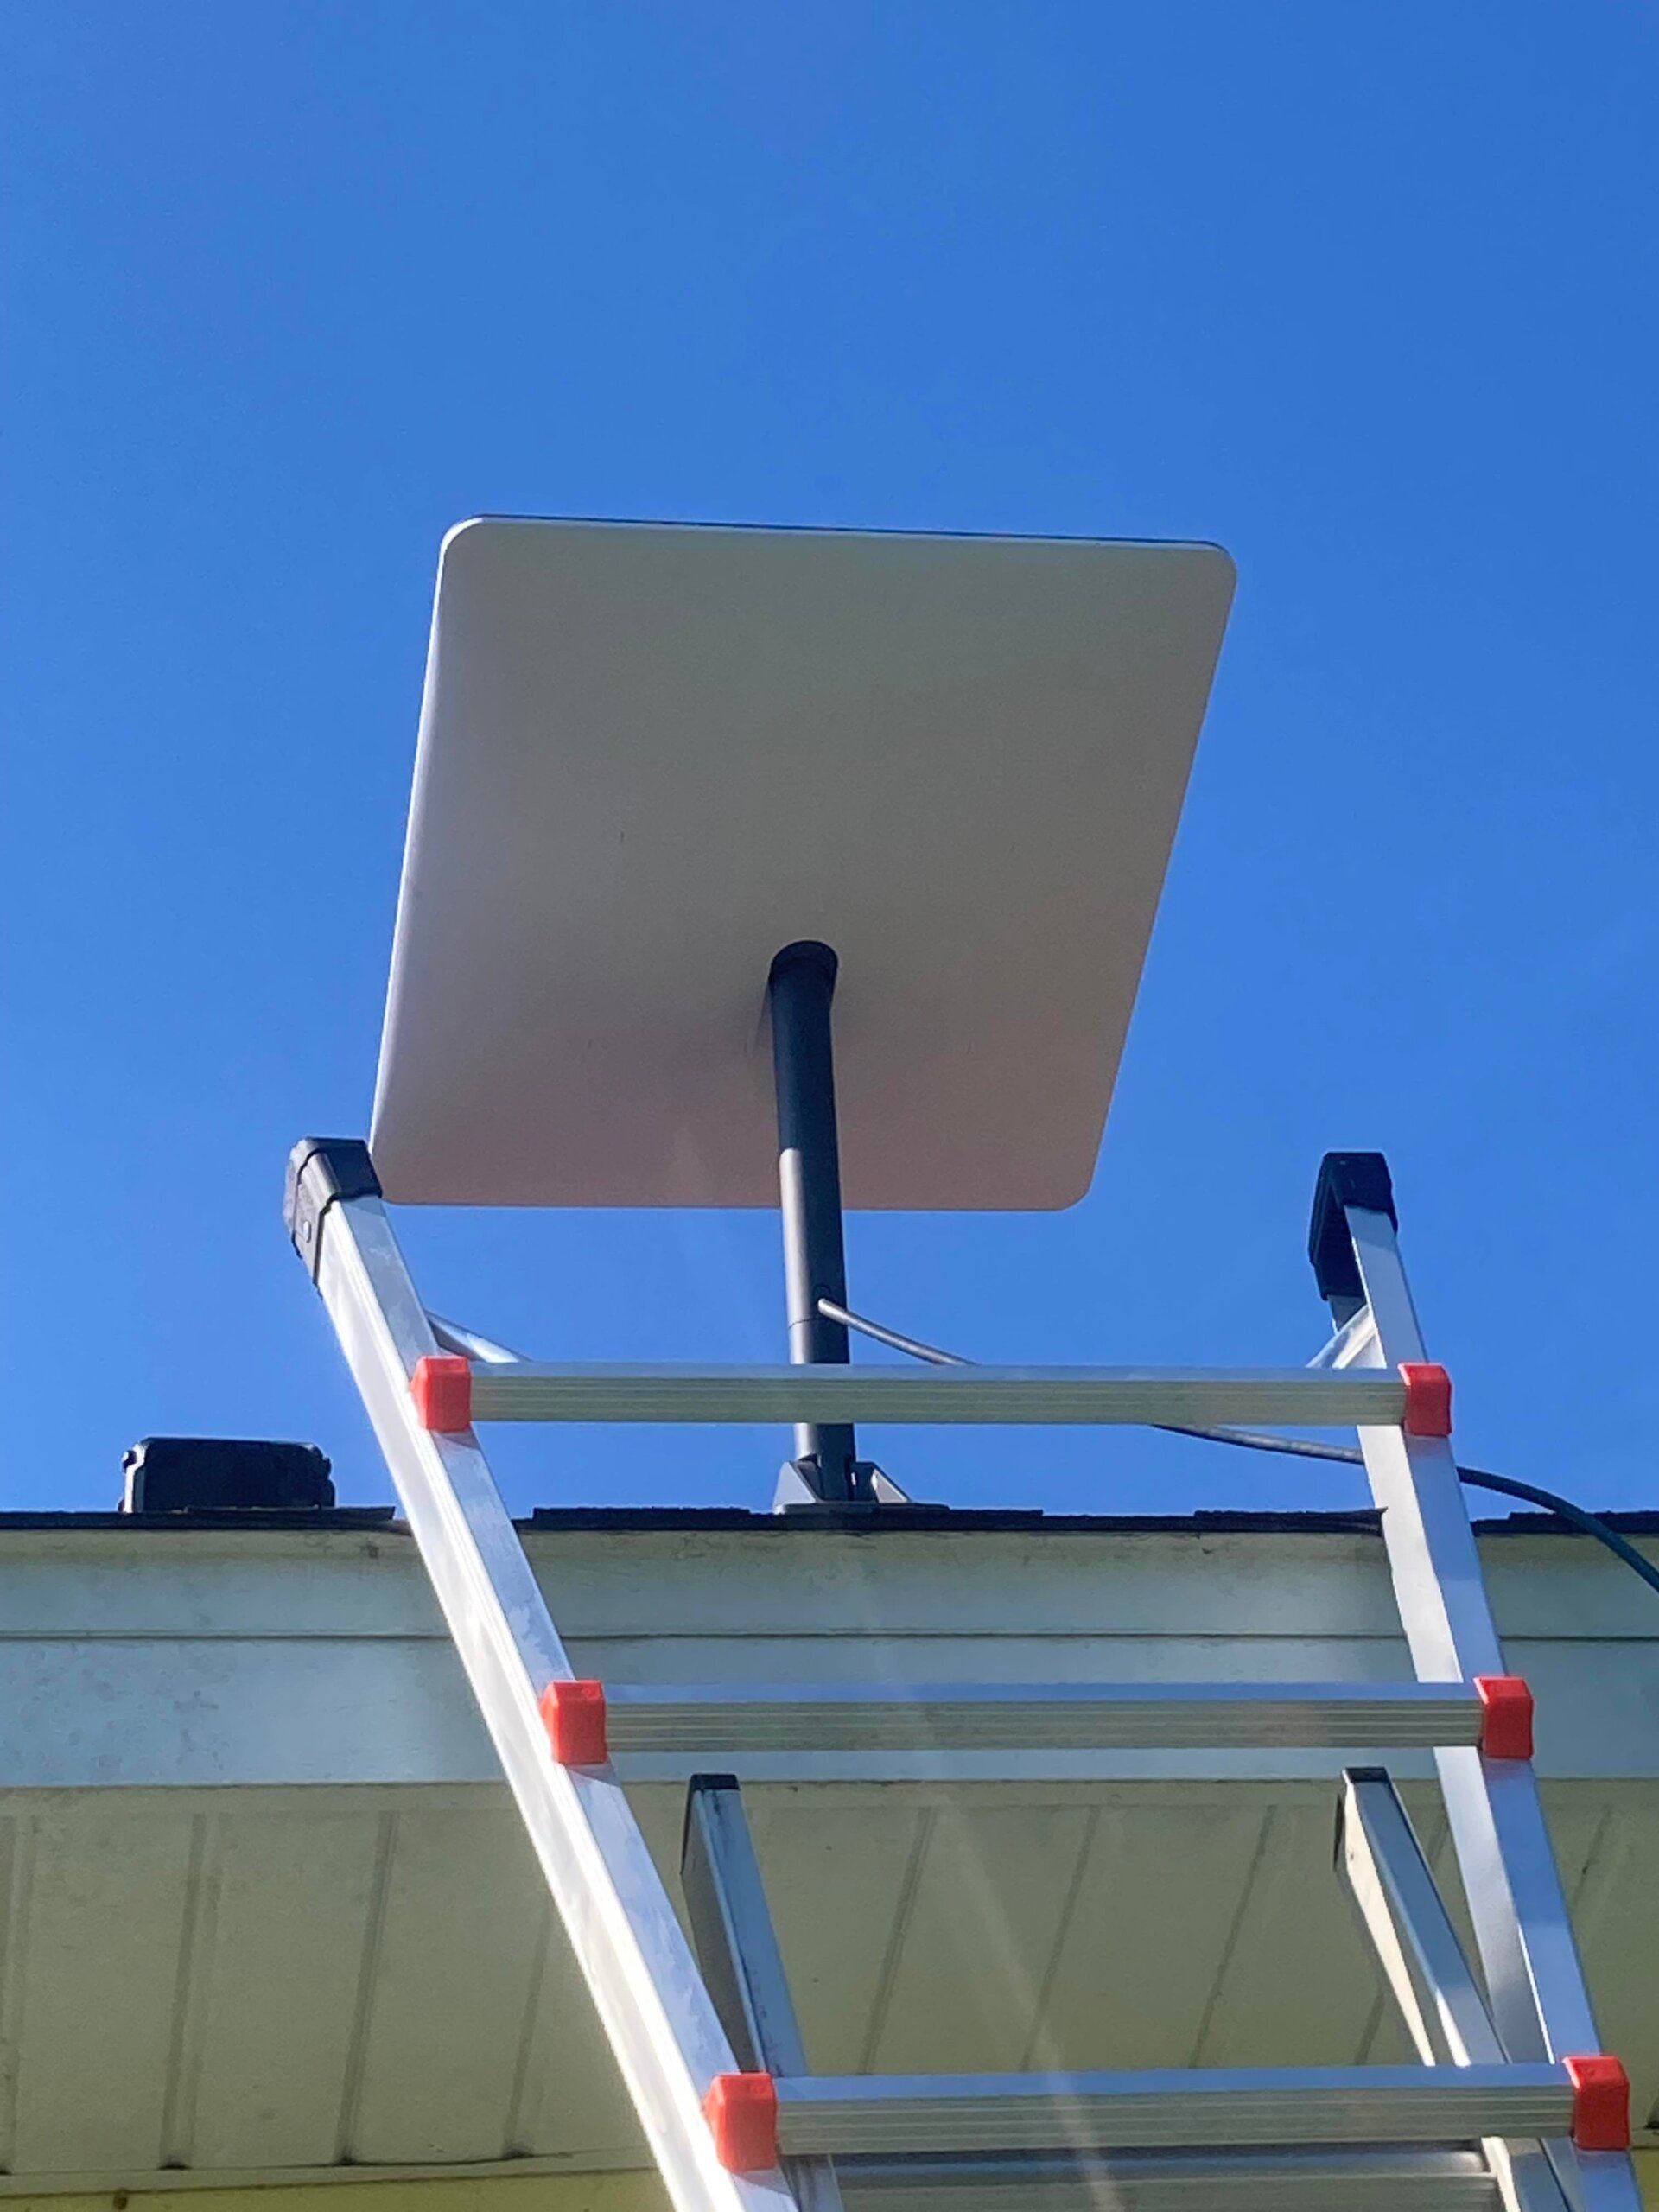 A ladder with a satellite dish on top of it